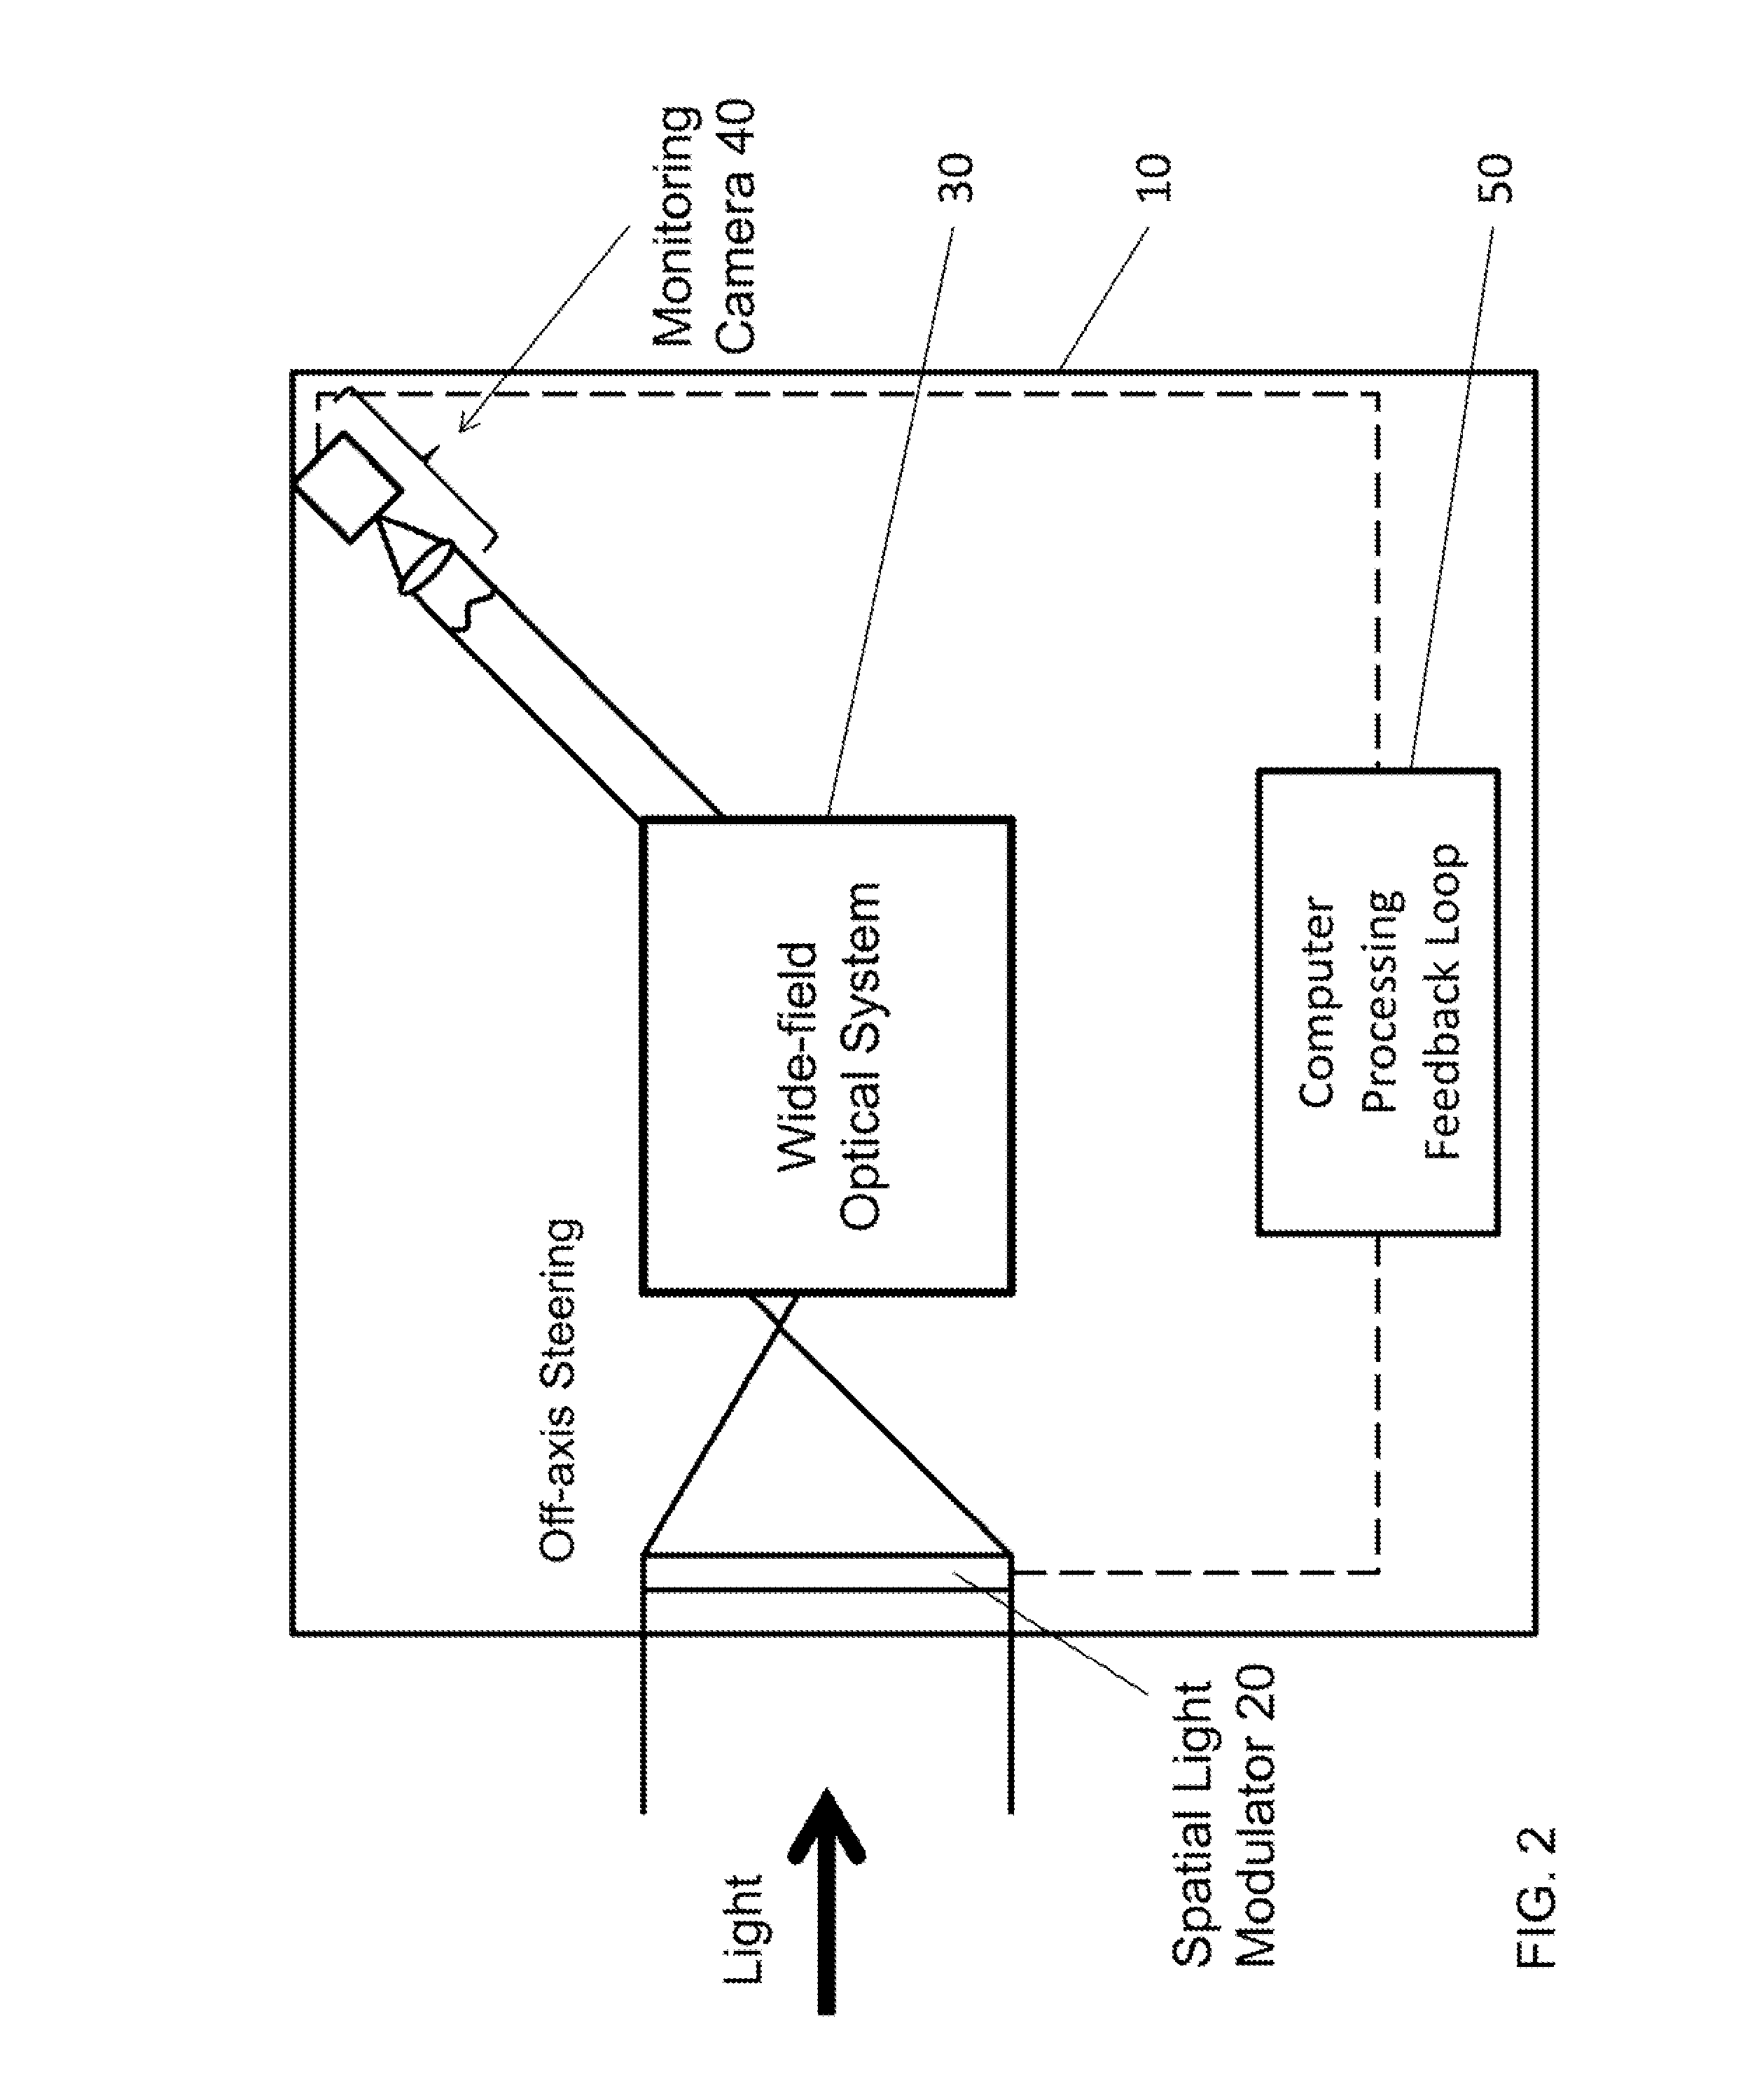 Method and apparatus of simultaneous spatial light modulator beam steering and system aberration correction